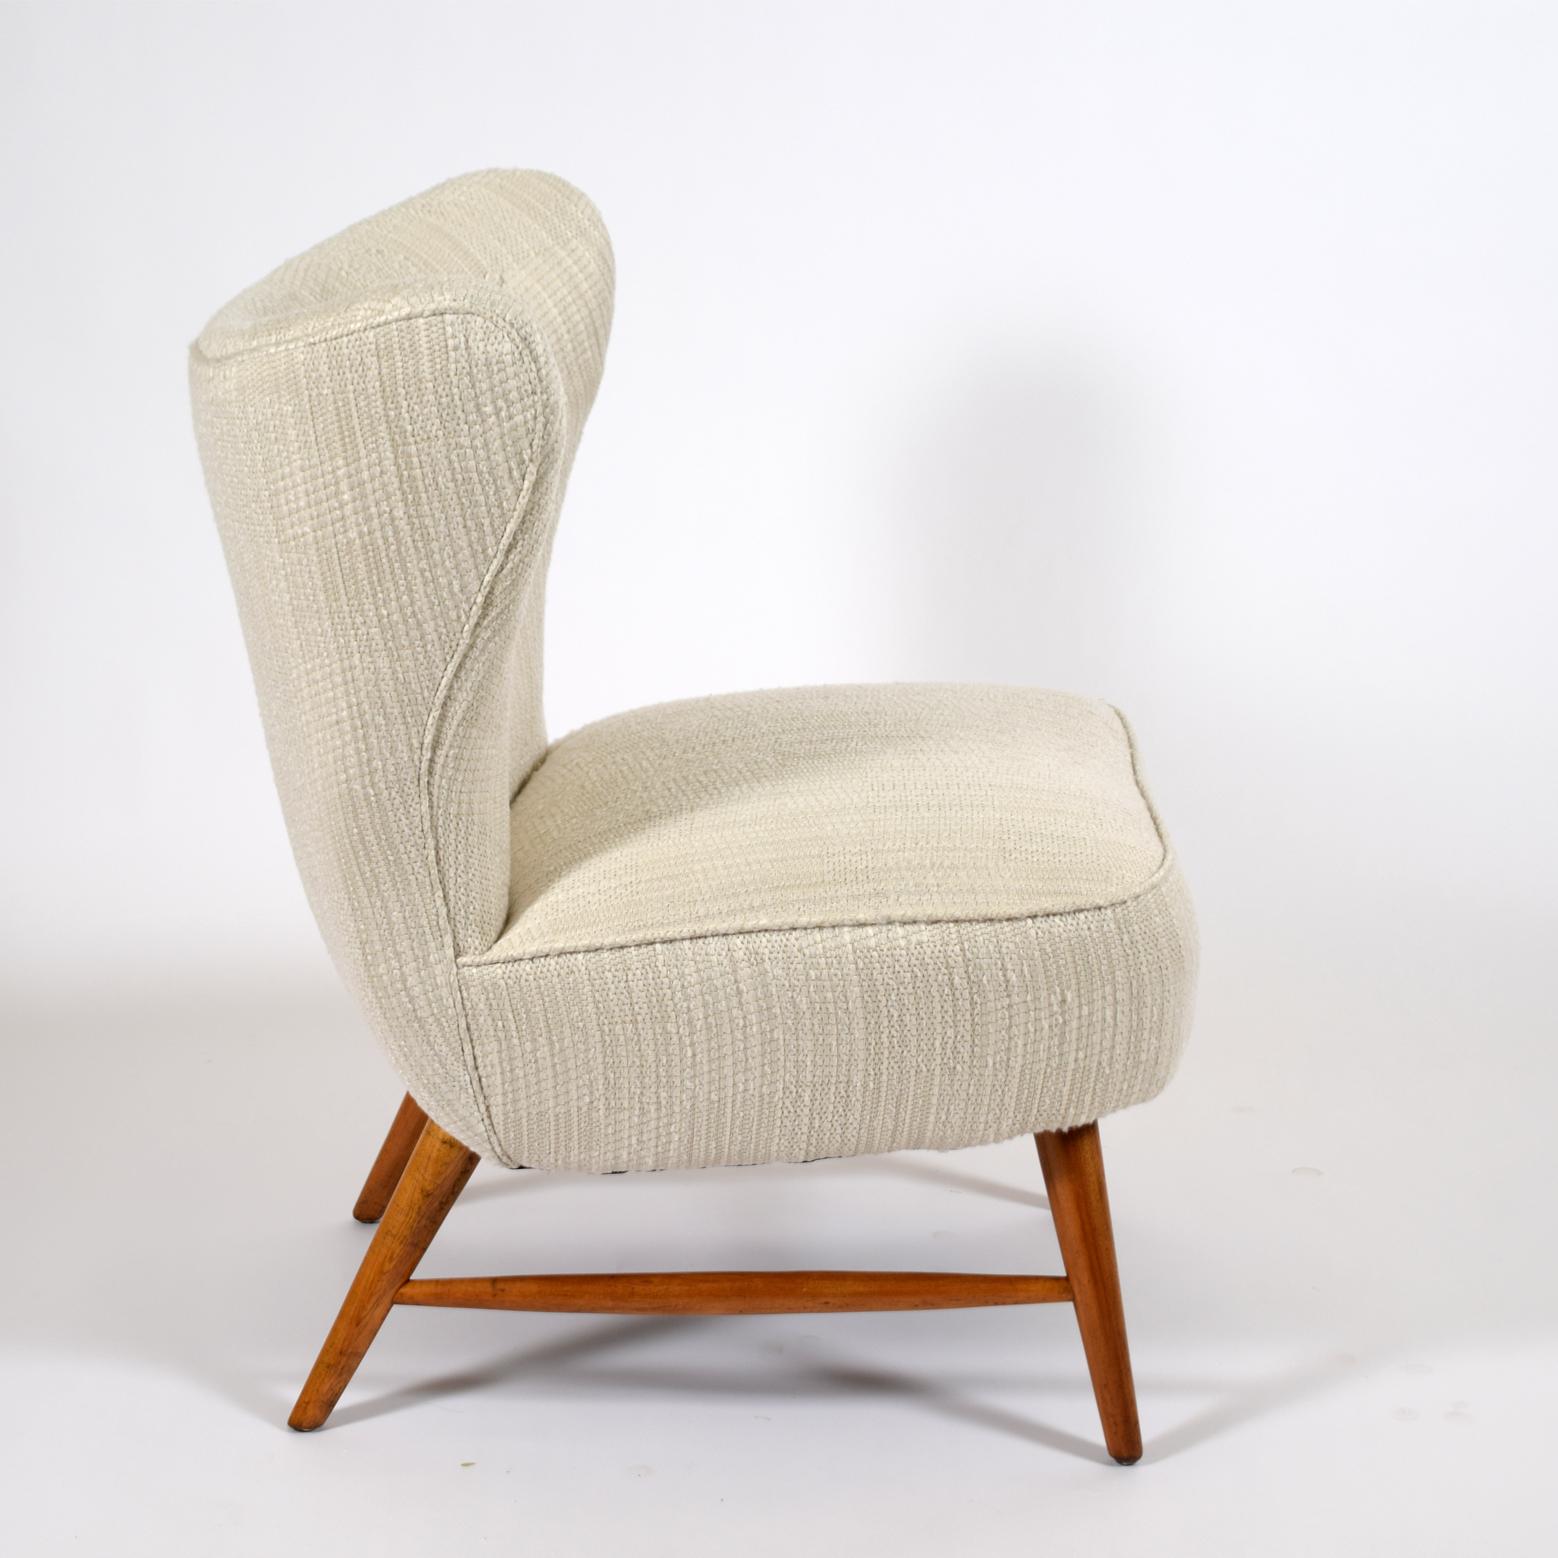 Rare chair, curved back on birch legs. Distributed by Knoll in the 1940's for a few years. new upholstery made by NK original label restored reupholstered.